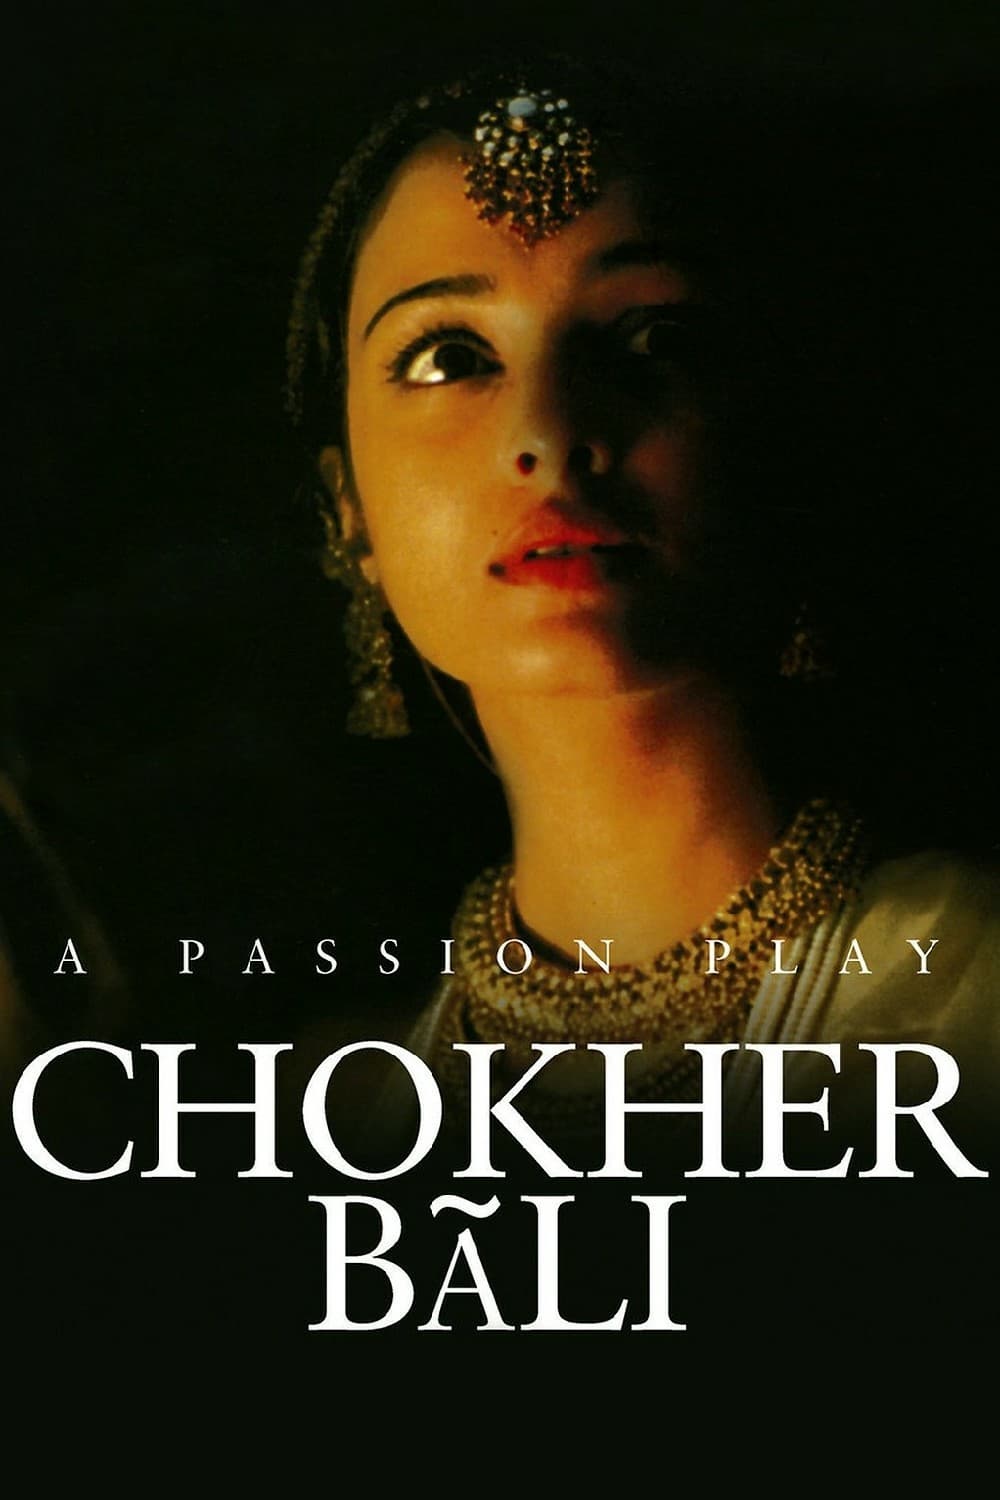 Poster for the movie "Chokher Bali"